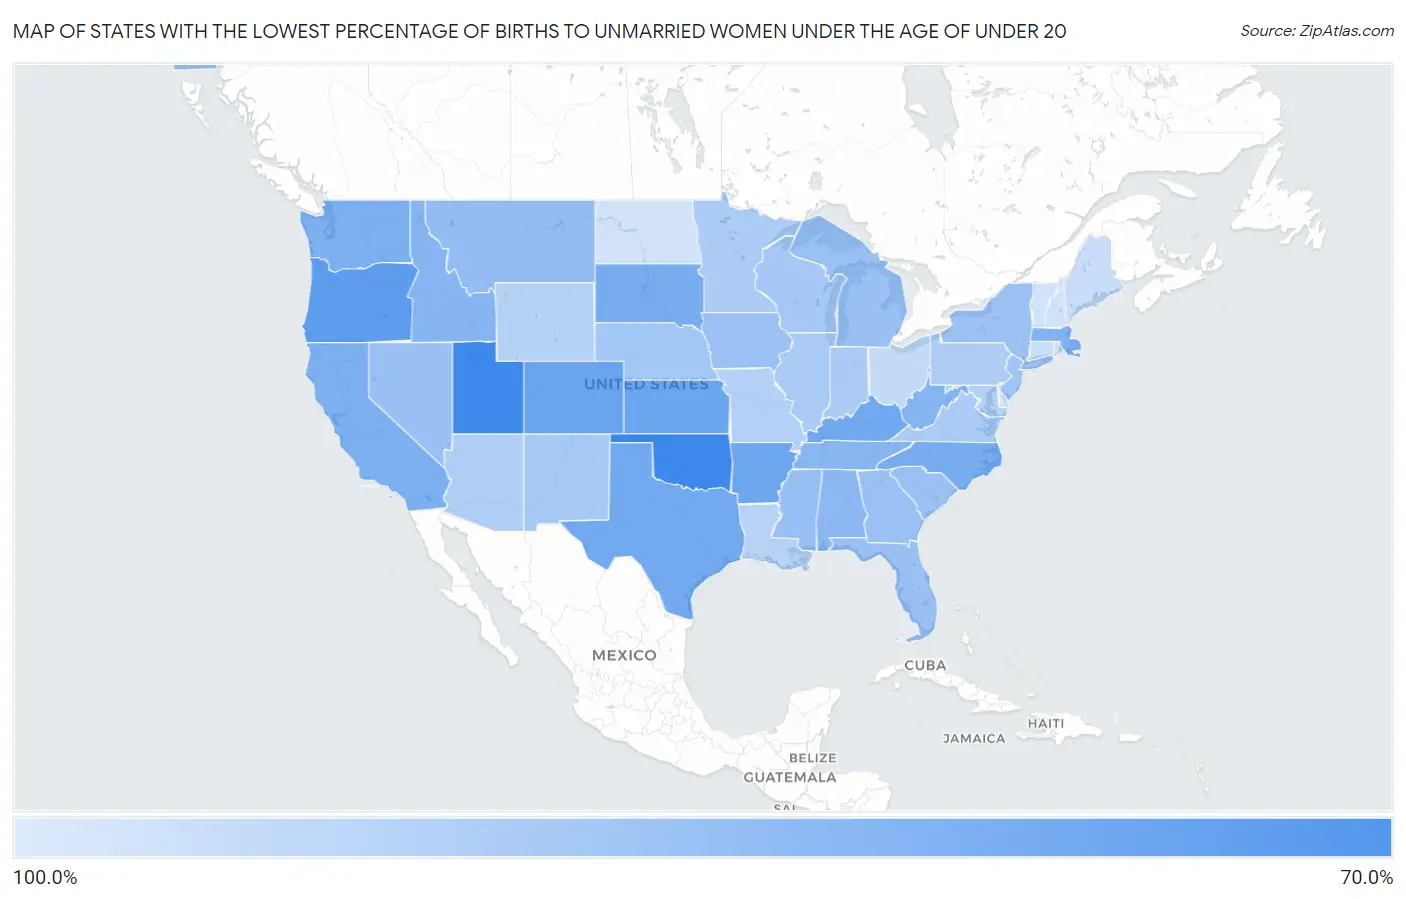 States with the Lowest Percentage of Births to Unmarried Women under the Age of under 20 in the United States Map